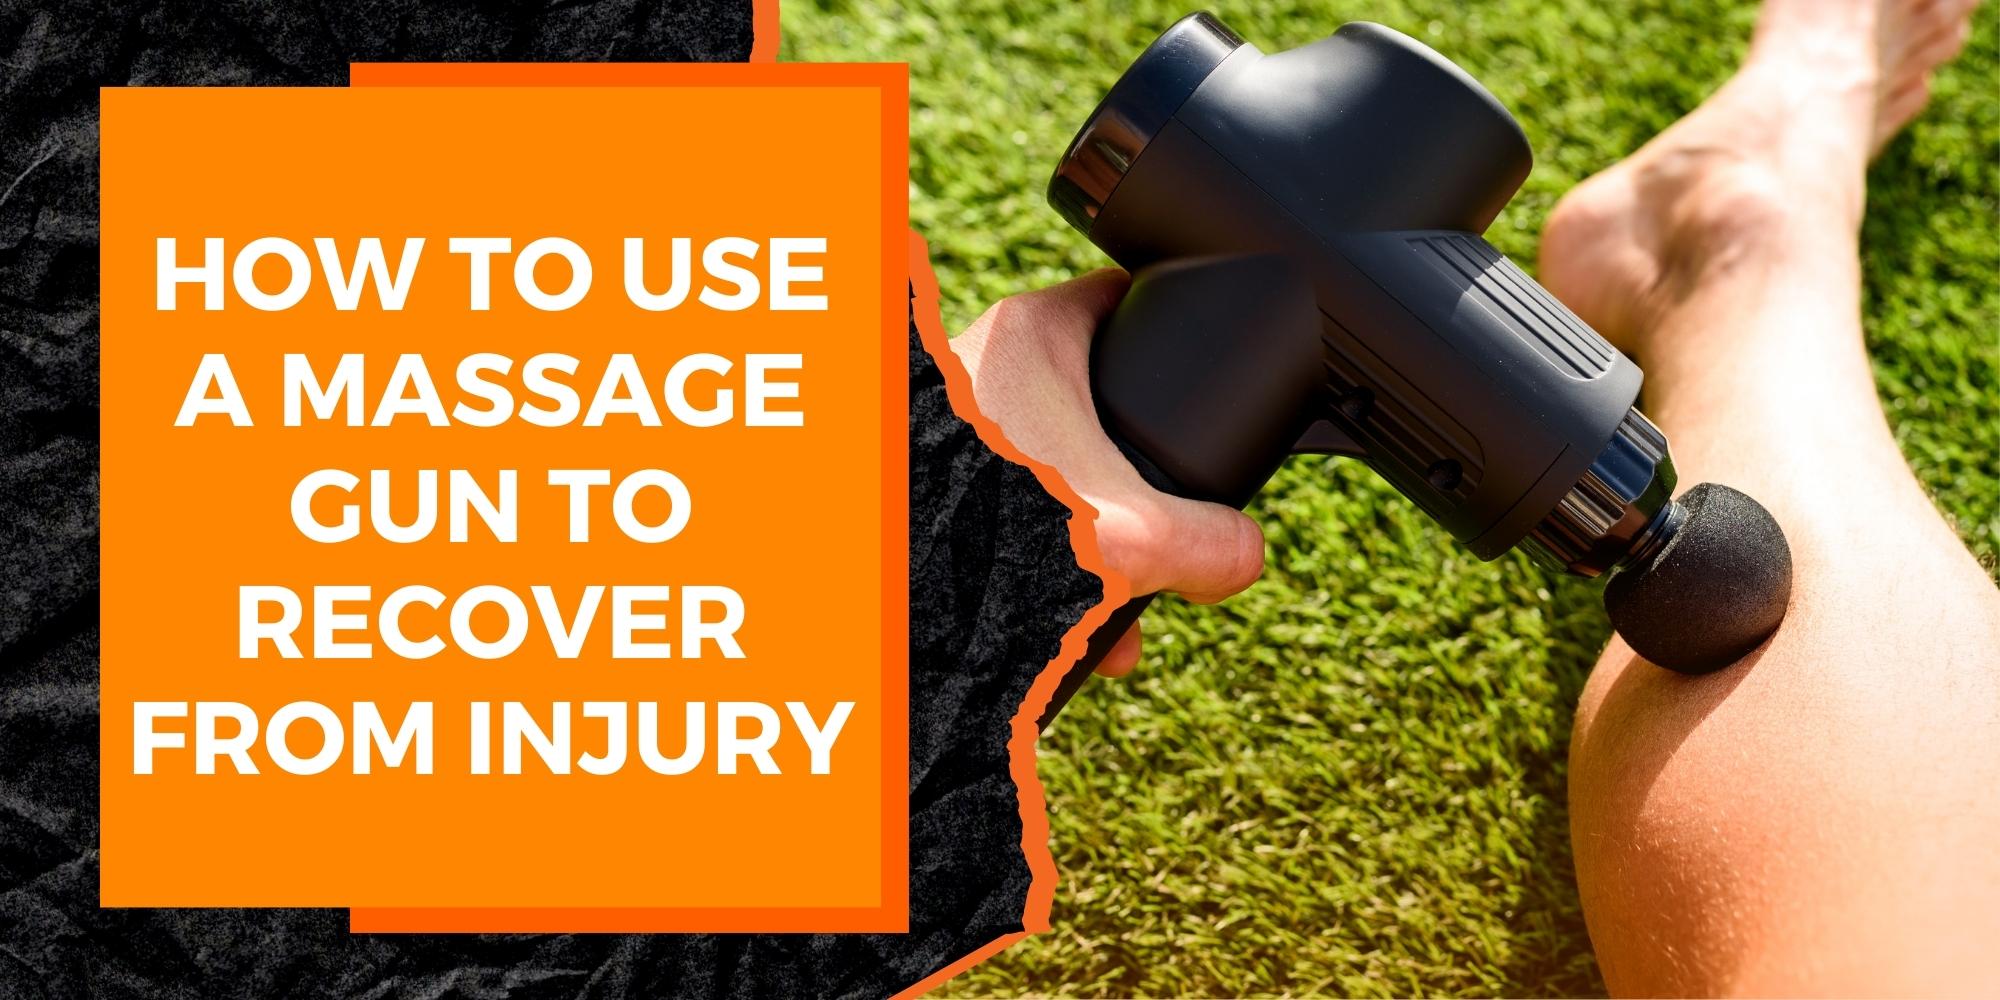 How to Use a Massage Gun to Recover From Injury